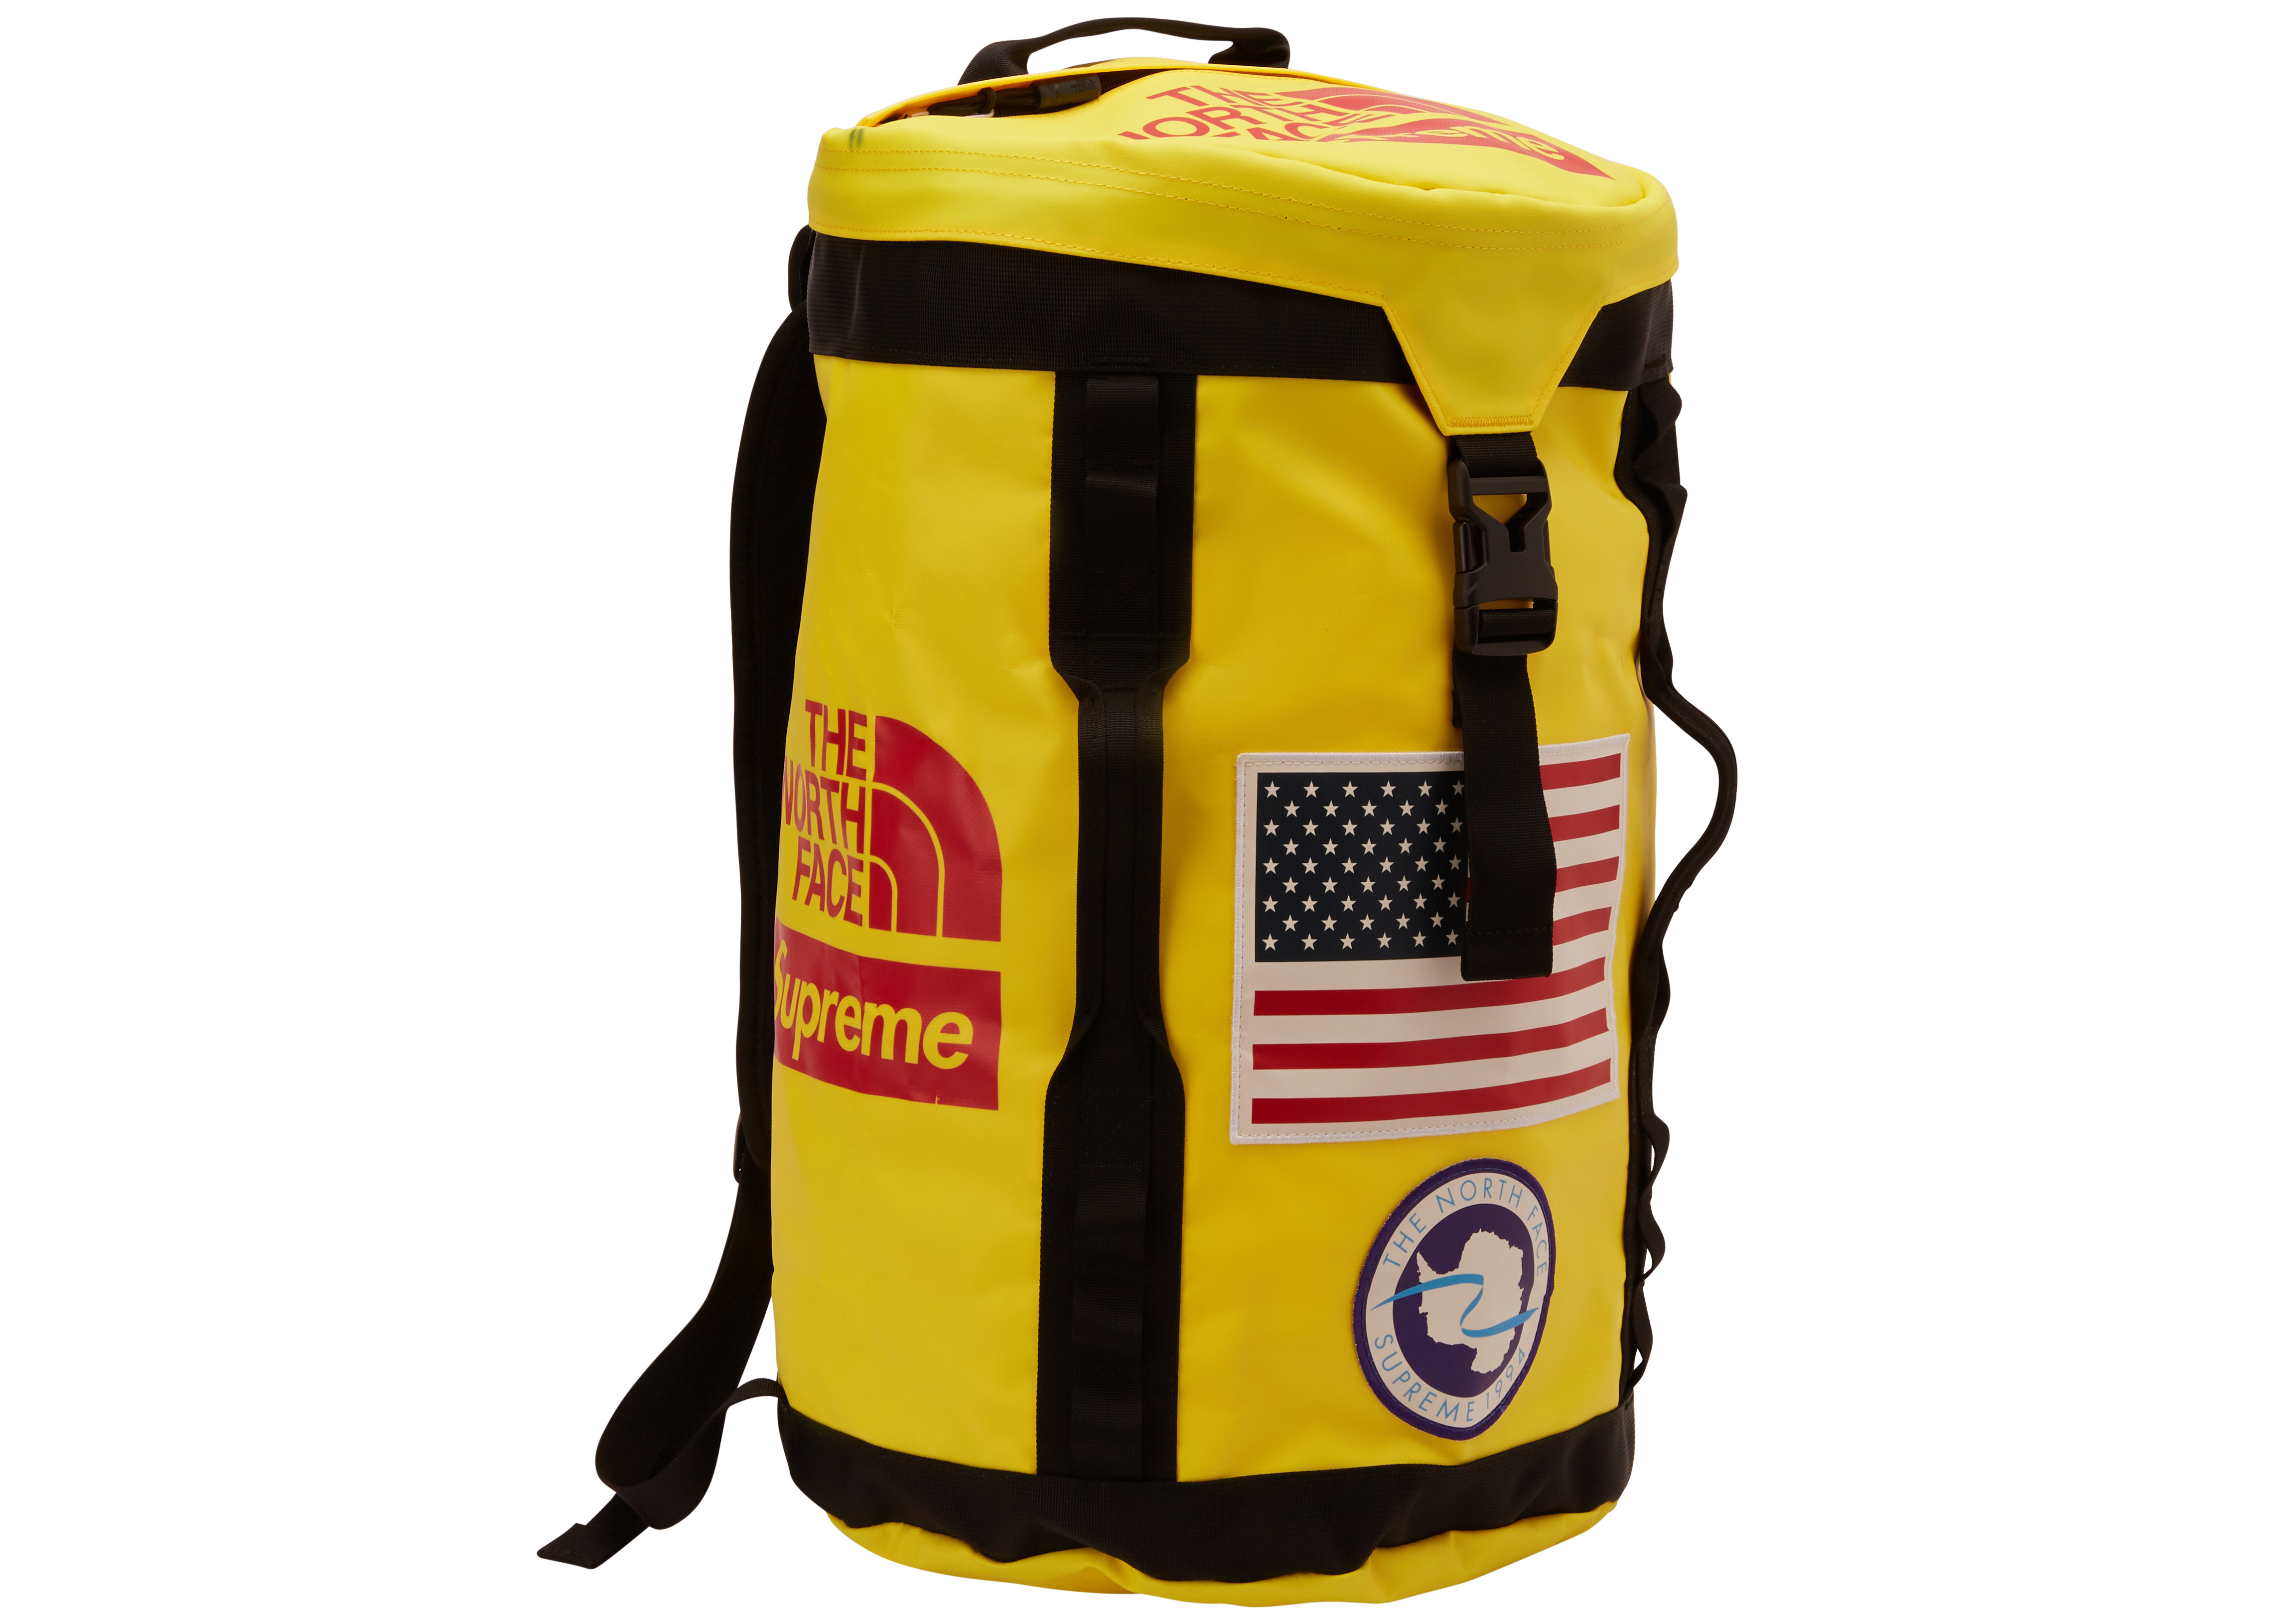 supreme the north face trans antarctica expedition big haul backpack black